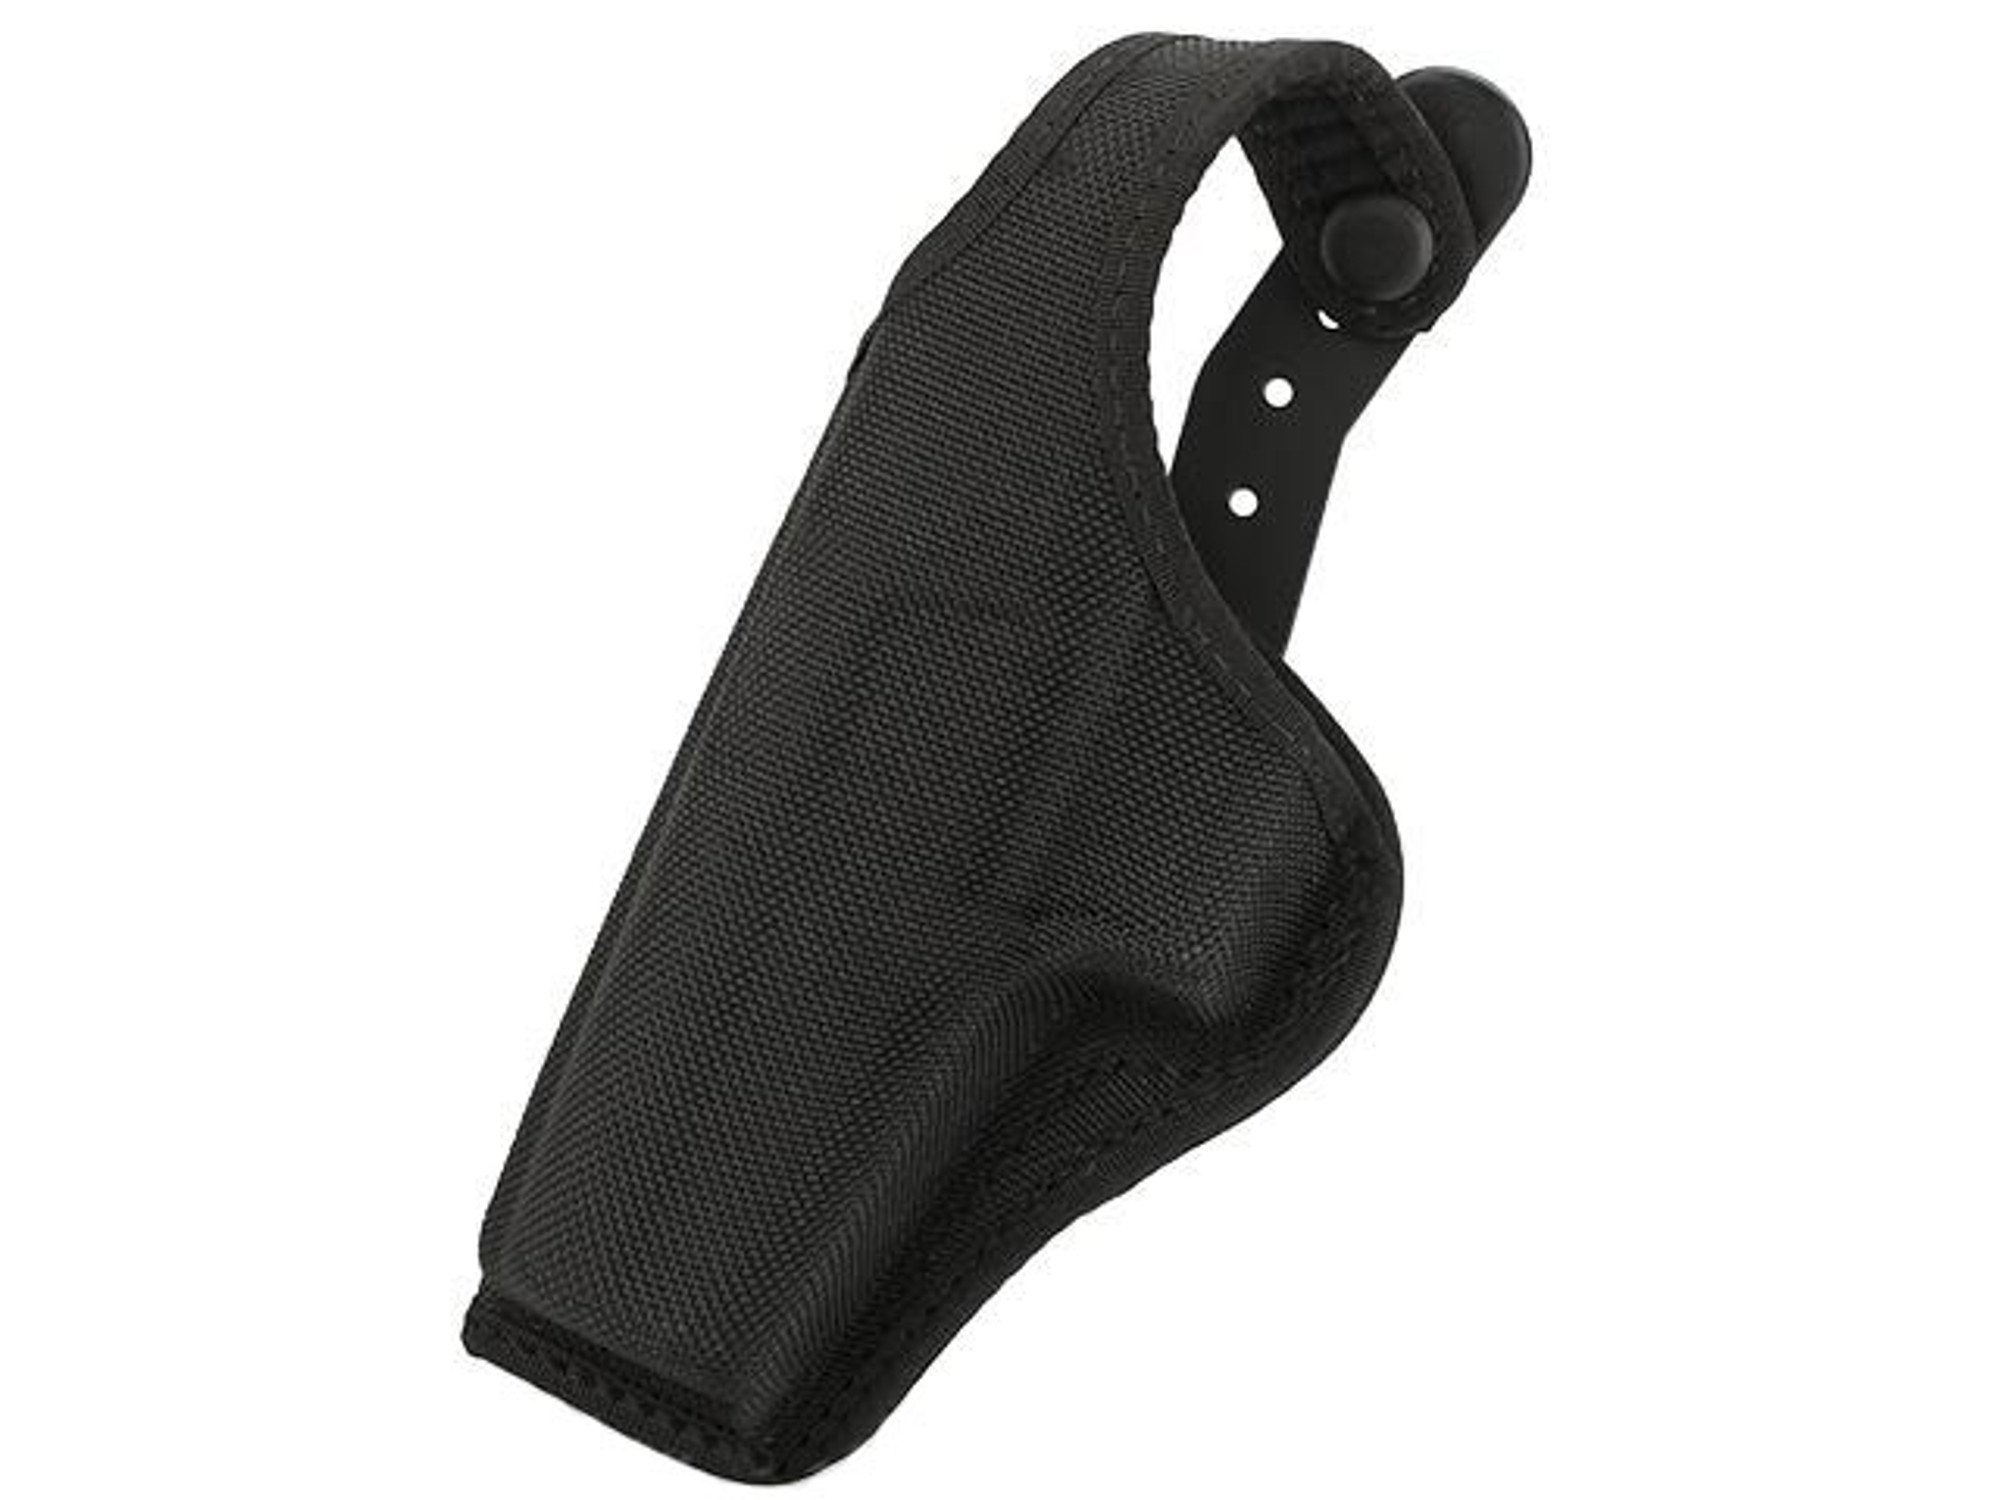 SAFARILAND / BIANCHI AccuMold Belt Clip Holster with Thumbsnap - H&K USP .40 / .45 (Left)